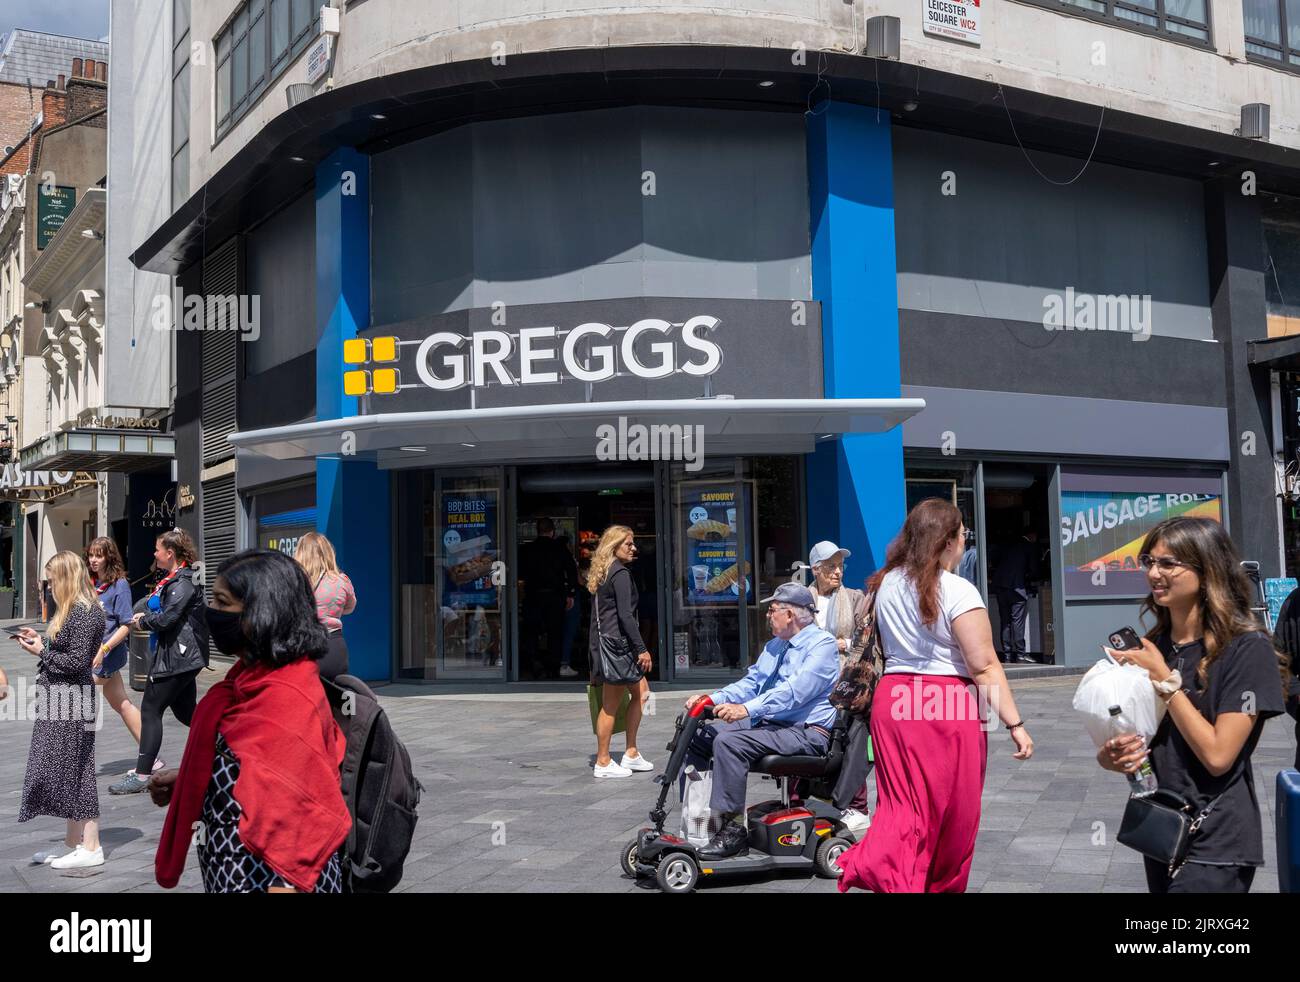 Greggs sales up 27% PH Jeff Moore 02/08/2022 Greggs new flagship store in Leicester Sq London Bakery chain Greggs said its sales jumped in the first h Stock Photo